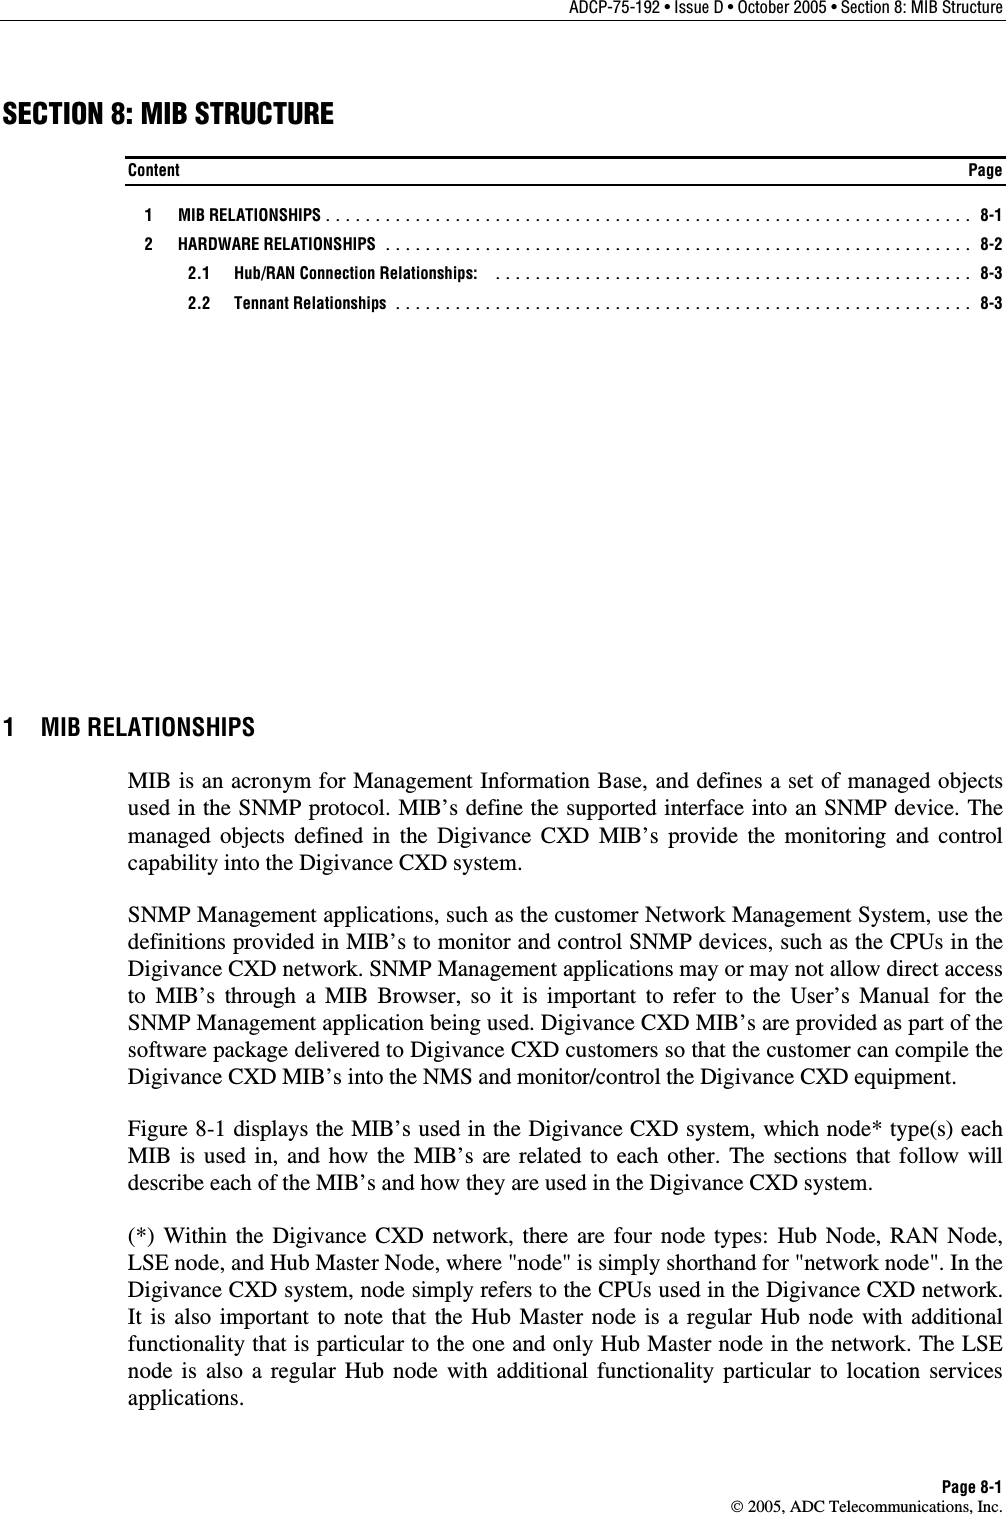 ADCP-75-192 • Issue D • October 2005 • Section 8: MIB Structure Page 8-1  2005, ADC Telecommunications, Inc. SECTION 8: MIB STRUCTURE Content  Page  1  MIB RELATIONSHIPS ................................................................. 8-1  2  HARDWARE RELATIONSHIPS ........................................................... 8-2  2.1 Hub/RAN Connection Relationships: ................................................ 8-3  2.2 Tennant Relationships .......................................................... 8-3 1 MIB RELATIONSHIPS MIB is an acronym for Management Information Base, and defines a set of managed objects used in the SNMP protocol. MIB’s define the supported interface into an SNMP device. The managed objects defined in the Digivance CXD MIB’s provide the monitoring and control capability into the Digivance CXD system. SNMP Management applications, such as the customer Network Management System, use the definitions provided in MIB’s to monitor and control SNMP devices, such as the CPUs in the Digivance CXD network. SNMP Management applications may or may not allow direct access to MIB’s through a MIB Browser, so it is important to refer to the User’s Manual for the SNMP Management application being used. Digivance CXD MIB’s are provided as part of the software package delivered to Digivance CXD customers so that the customer can compile the Digivance CXD MIB’s into the NMS and monitor/control the Digivance CXD equipment. Figure 8-1 displays the MIB’s used in the Digivance CXD system, which node* type(s) each MIB is used in, and how the MIB’s are related to each other. The sections that follow will describe each of the MIB’s and how they are used in the Digivance CXD system.  (*) Within the Digivance CXD network, there are four node types: Hub Node, RAN Node, LSE node, and Hub Master Node, where &quot;node&quot; is simply shorthand for &quot;network node&quot;. In the Digivance CXD system, node simply refers to the CPUs used in the Digivance CXD network. It is also important to note that the Hub Master node is a regular Hub node with additional functionality that is particular to the one and only Hub Master node in the network. The LSE node is also a regular Hub node with additional functionality particular to location services applications. 